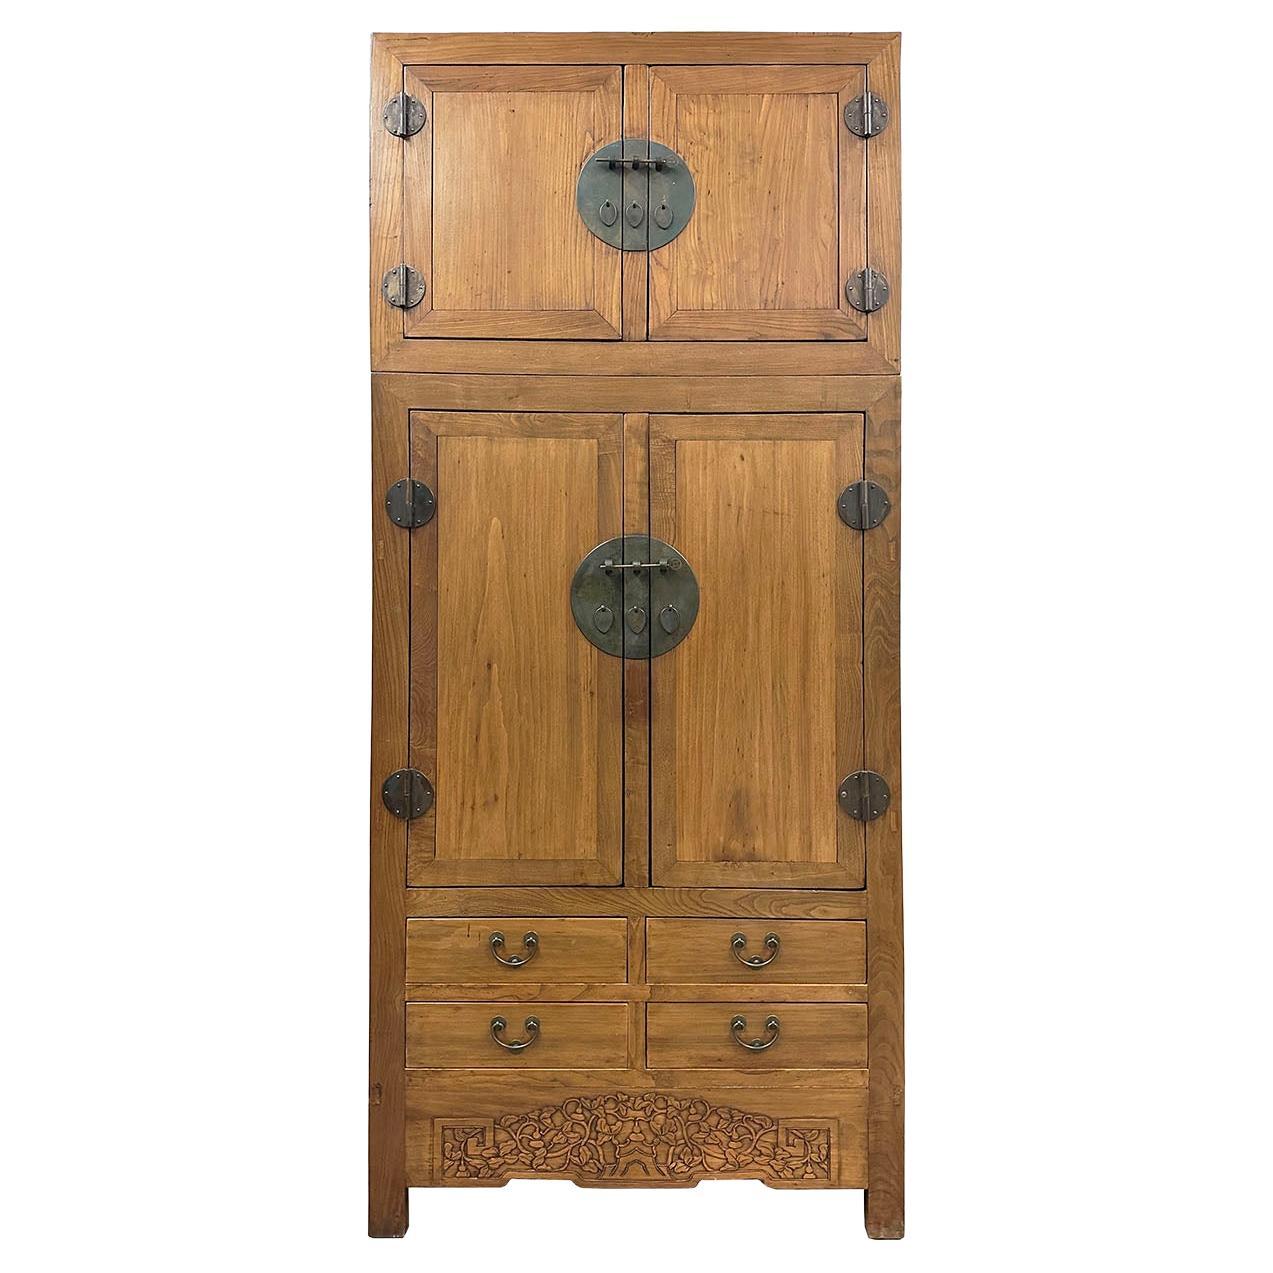 Early 20th Century Chinese Compound Wedding Armoire/Wardrobe Description For Sale